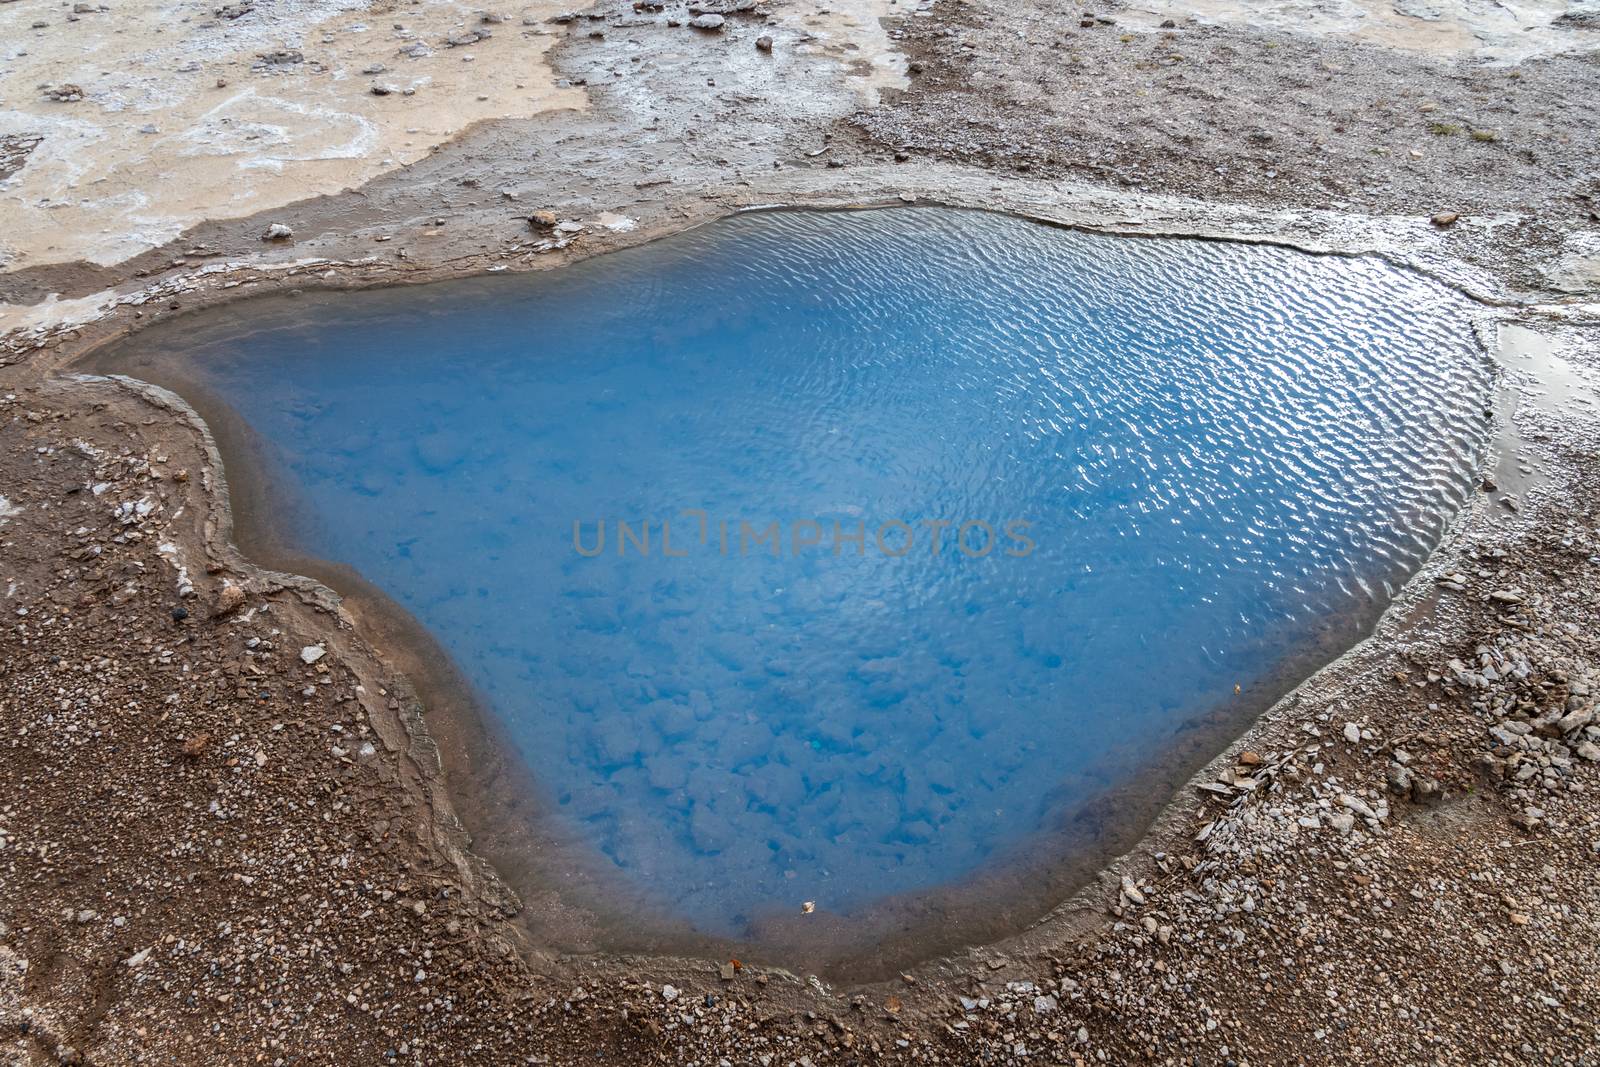 Geysir Golden Circle in Iceland milky water in thermal spring pool called Blesi by MXW_Stock